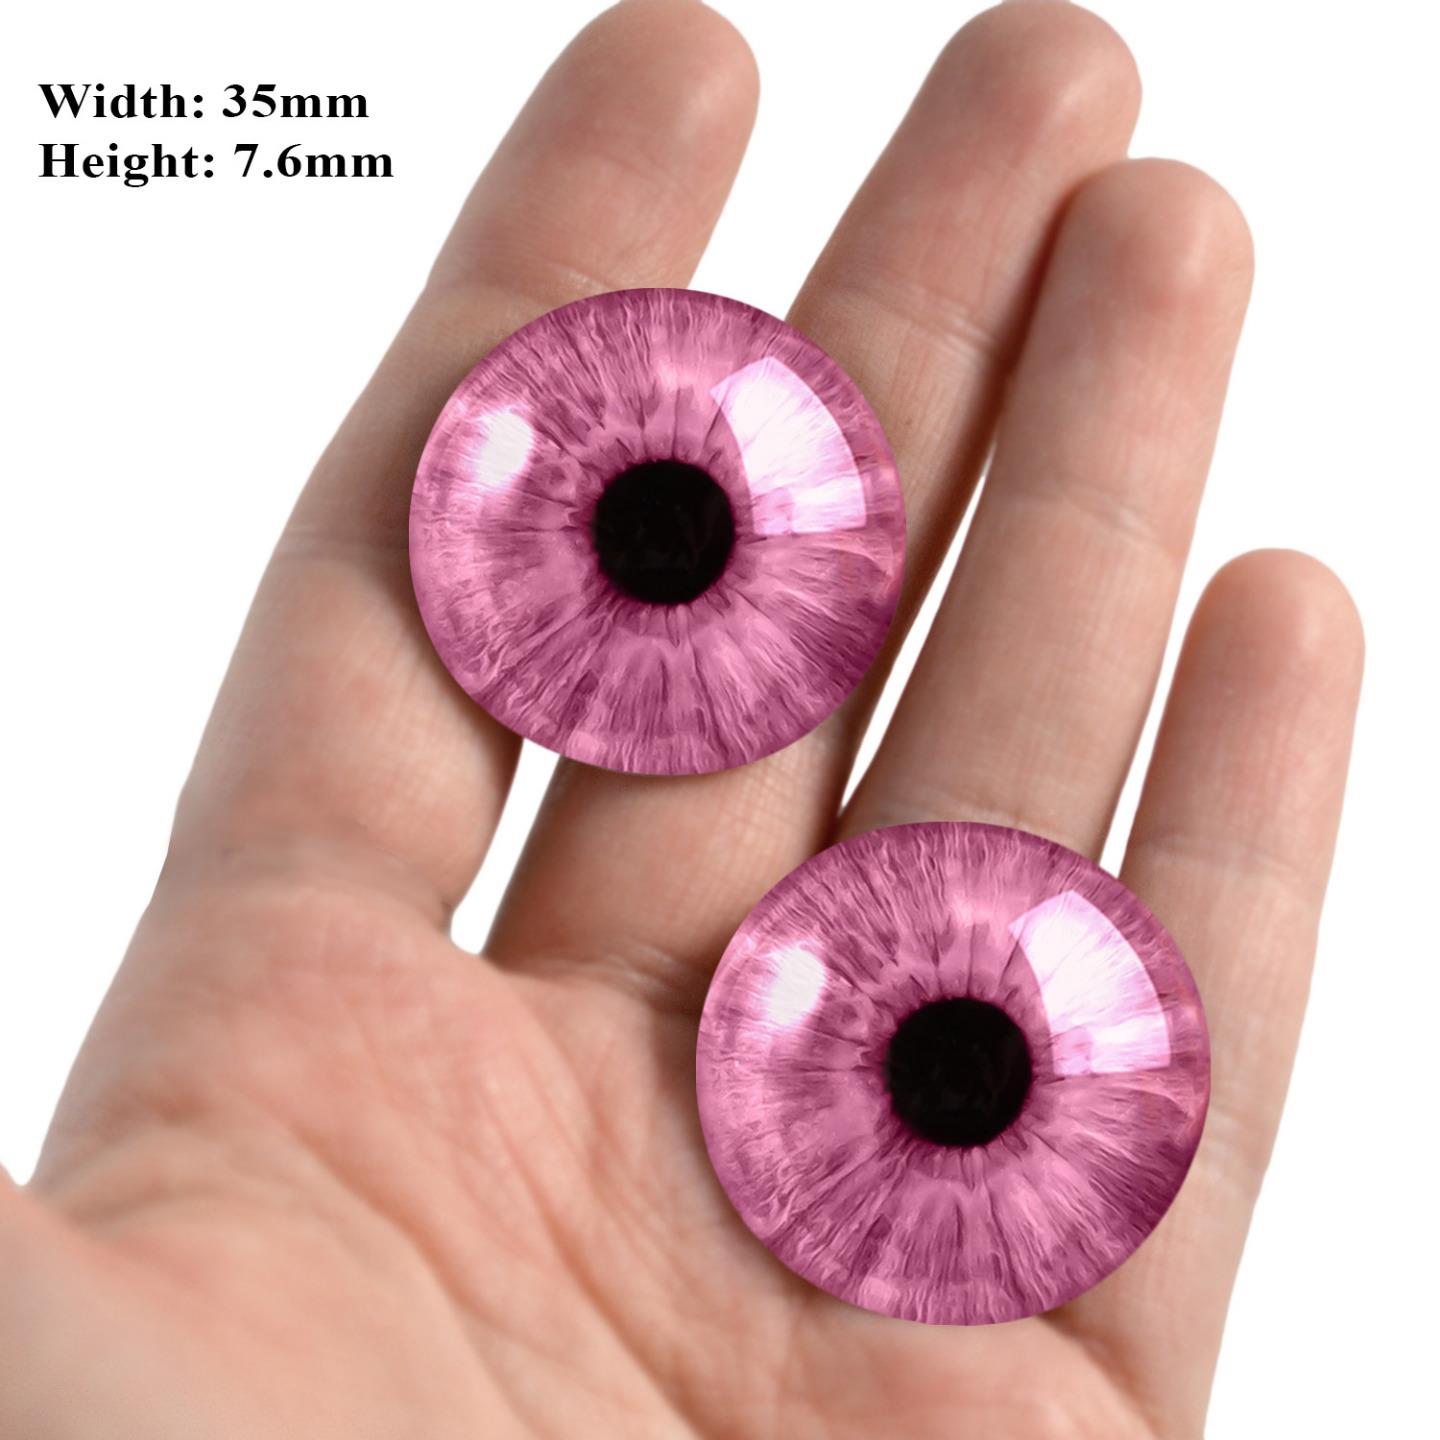 2x Realistic Doll Eyes, Wiggle Eyes (6 Mm) Accessories, Movable, Art  Eyeball for Doll Making Supplies DIY Stuffed Animals Sculpture , Pink Pink  